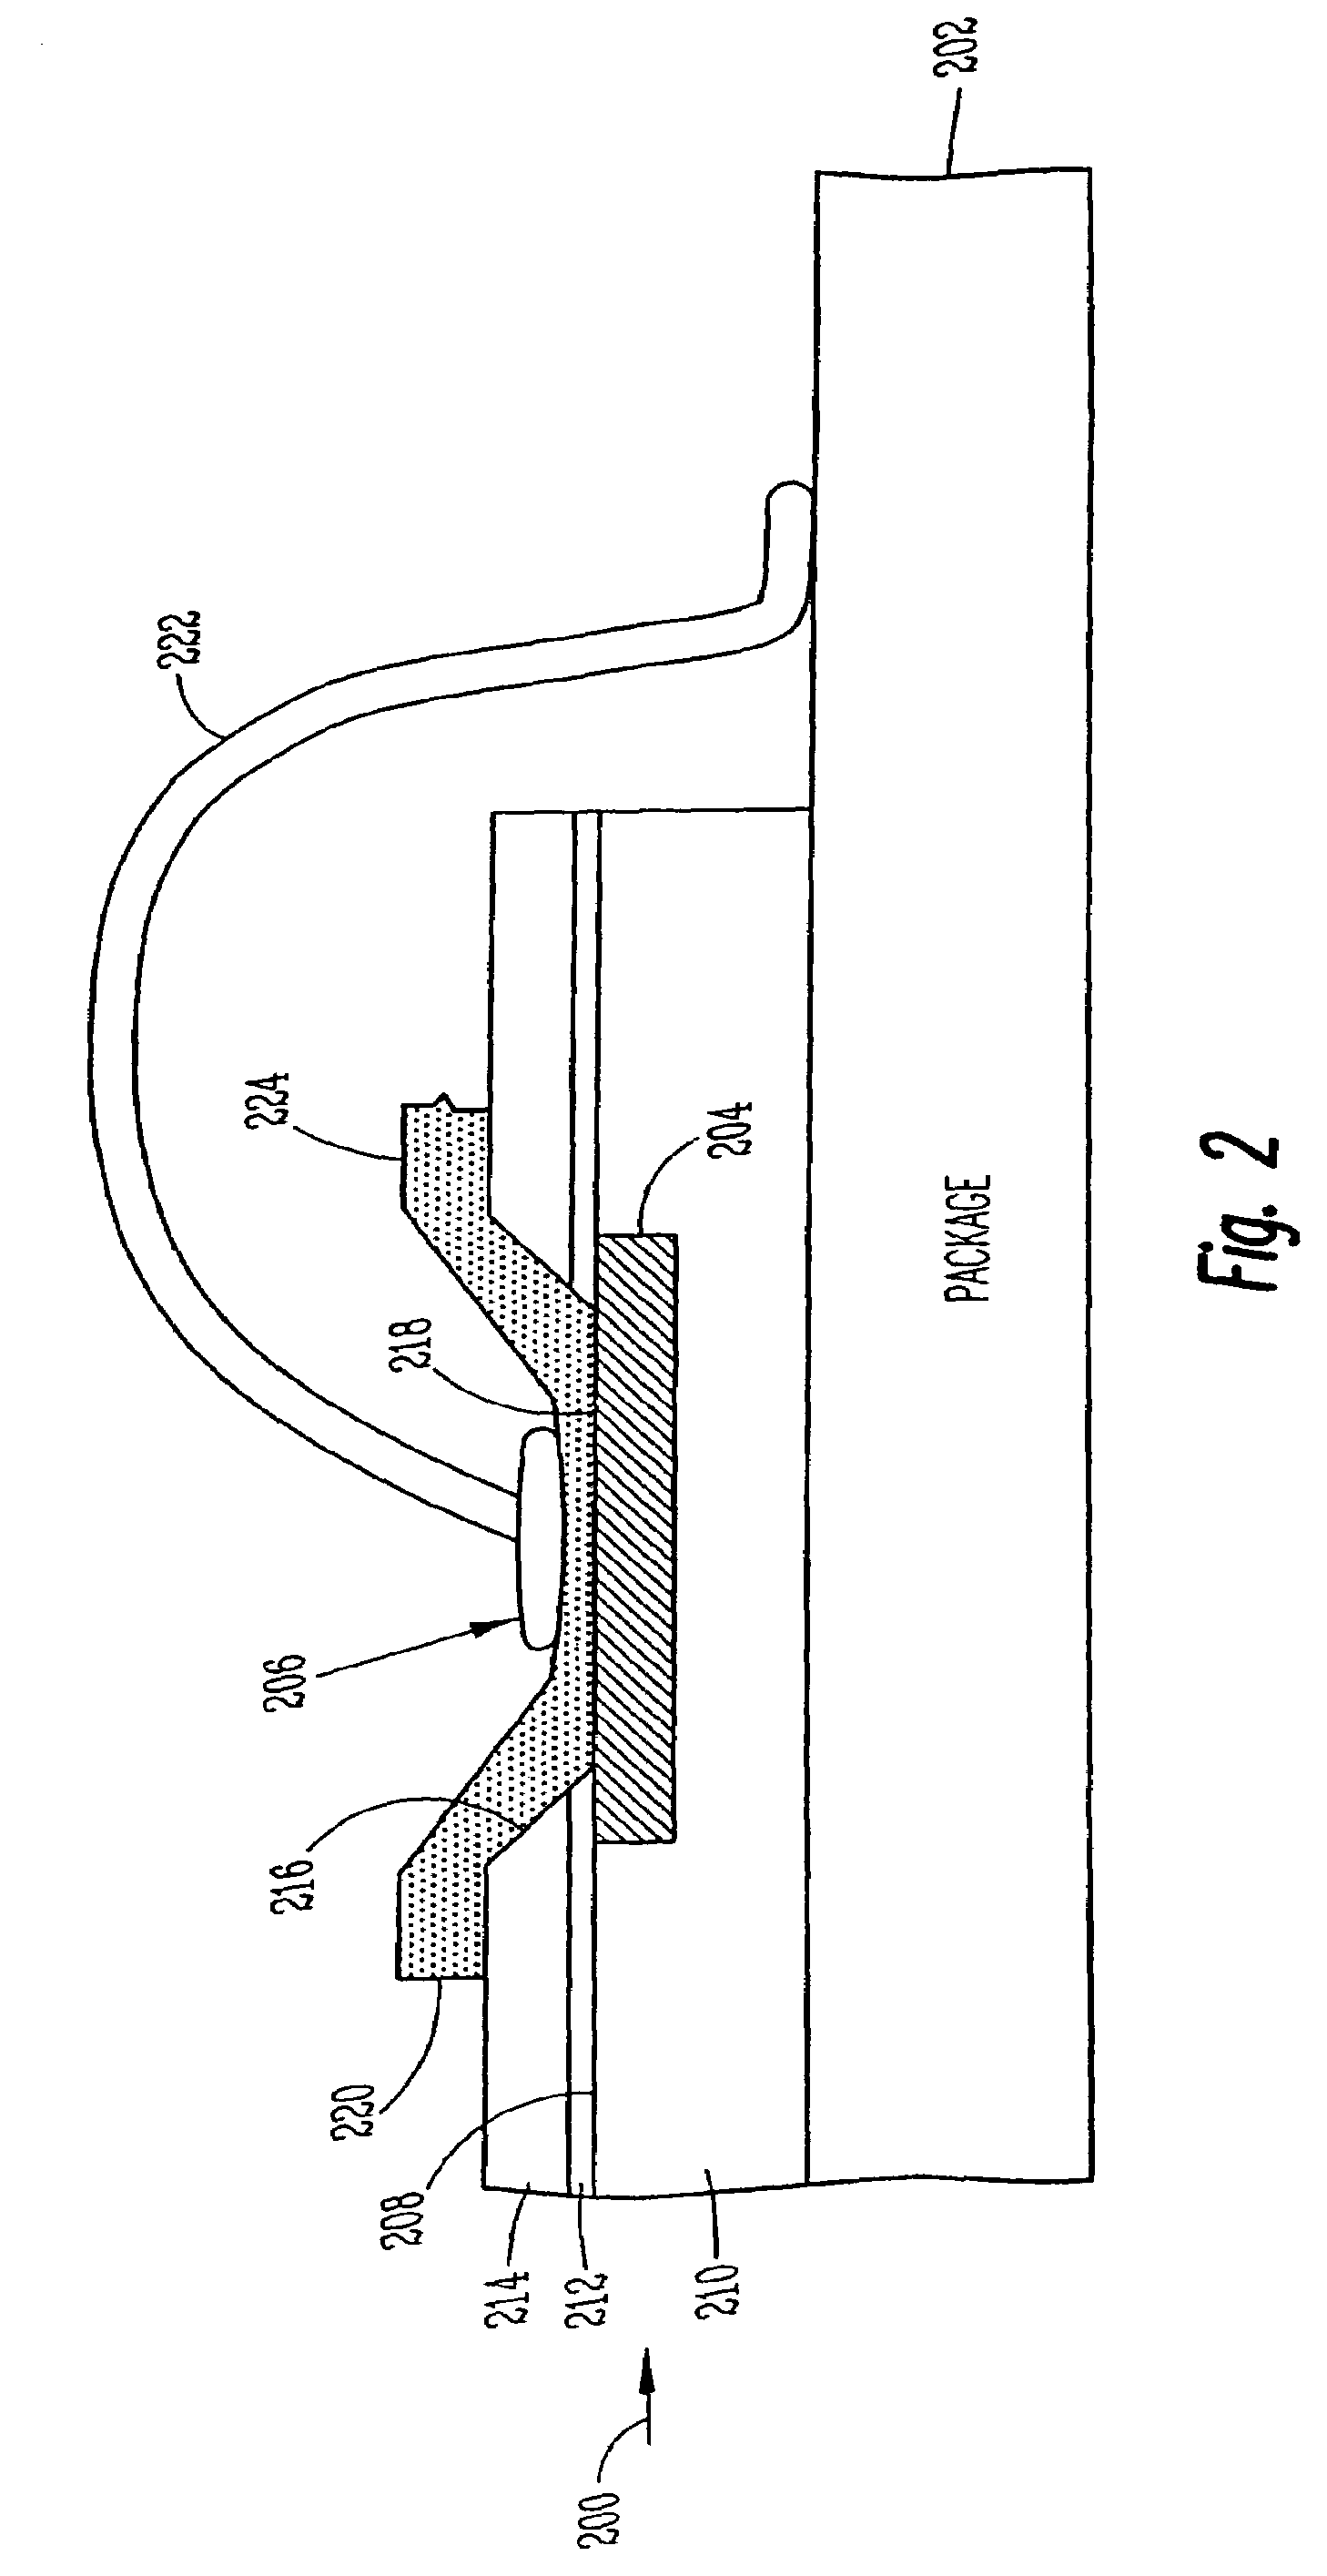 Wirebond structure and method to connect to a microelectronic die